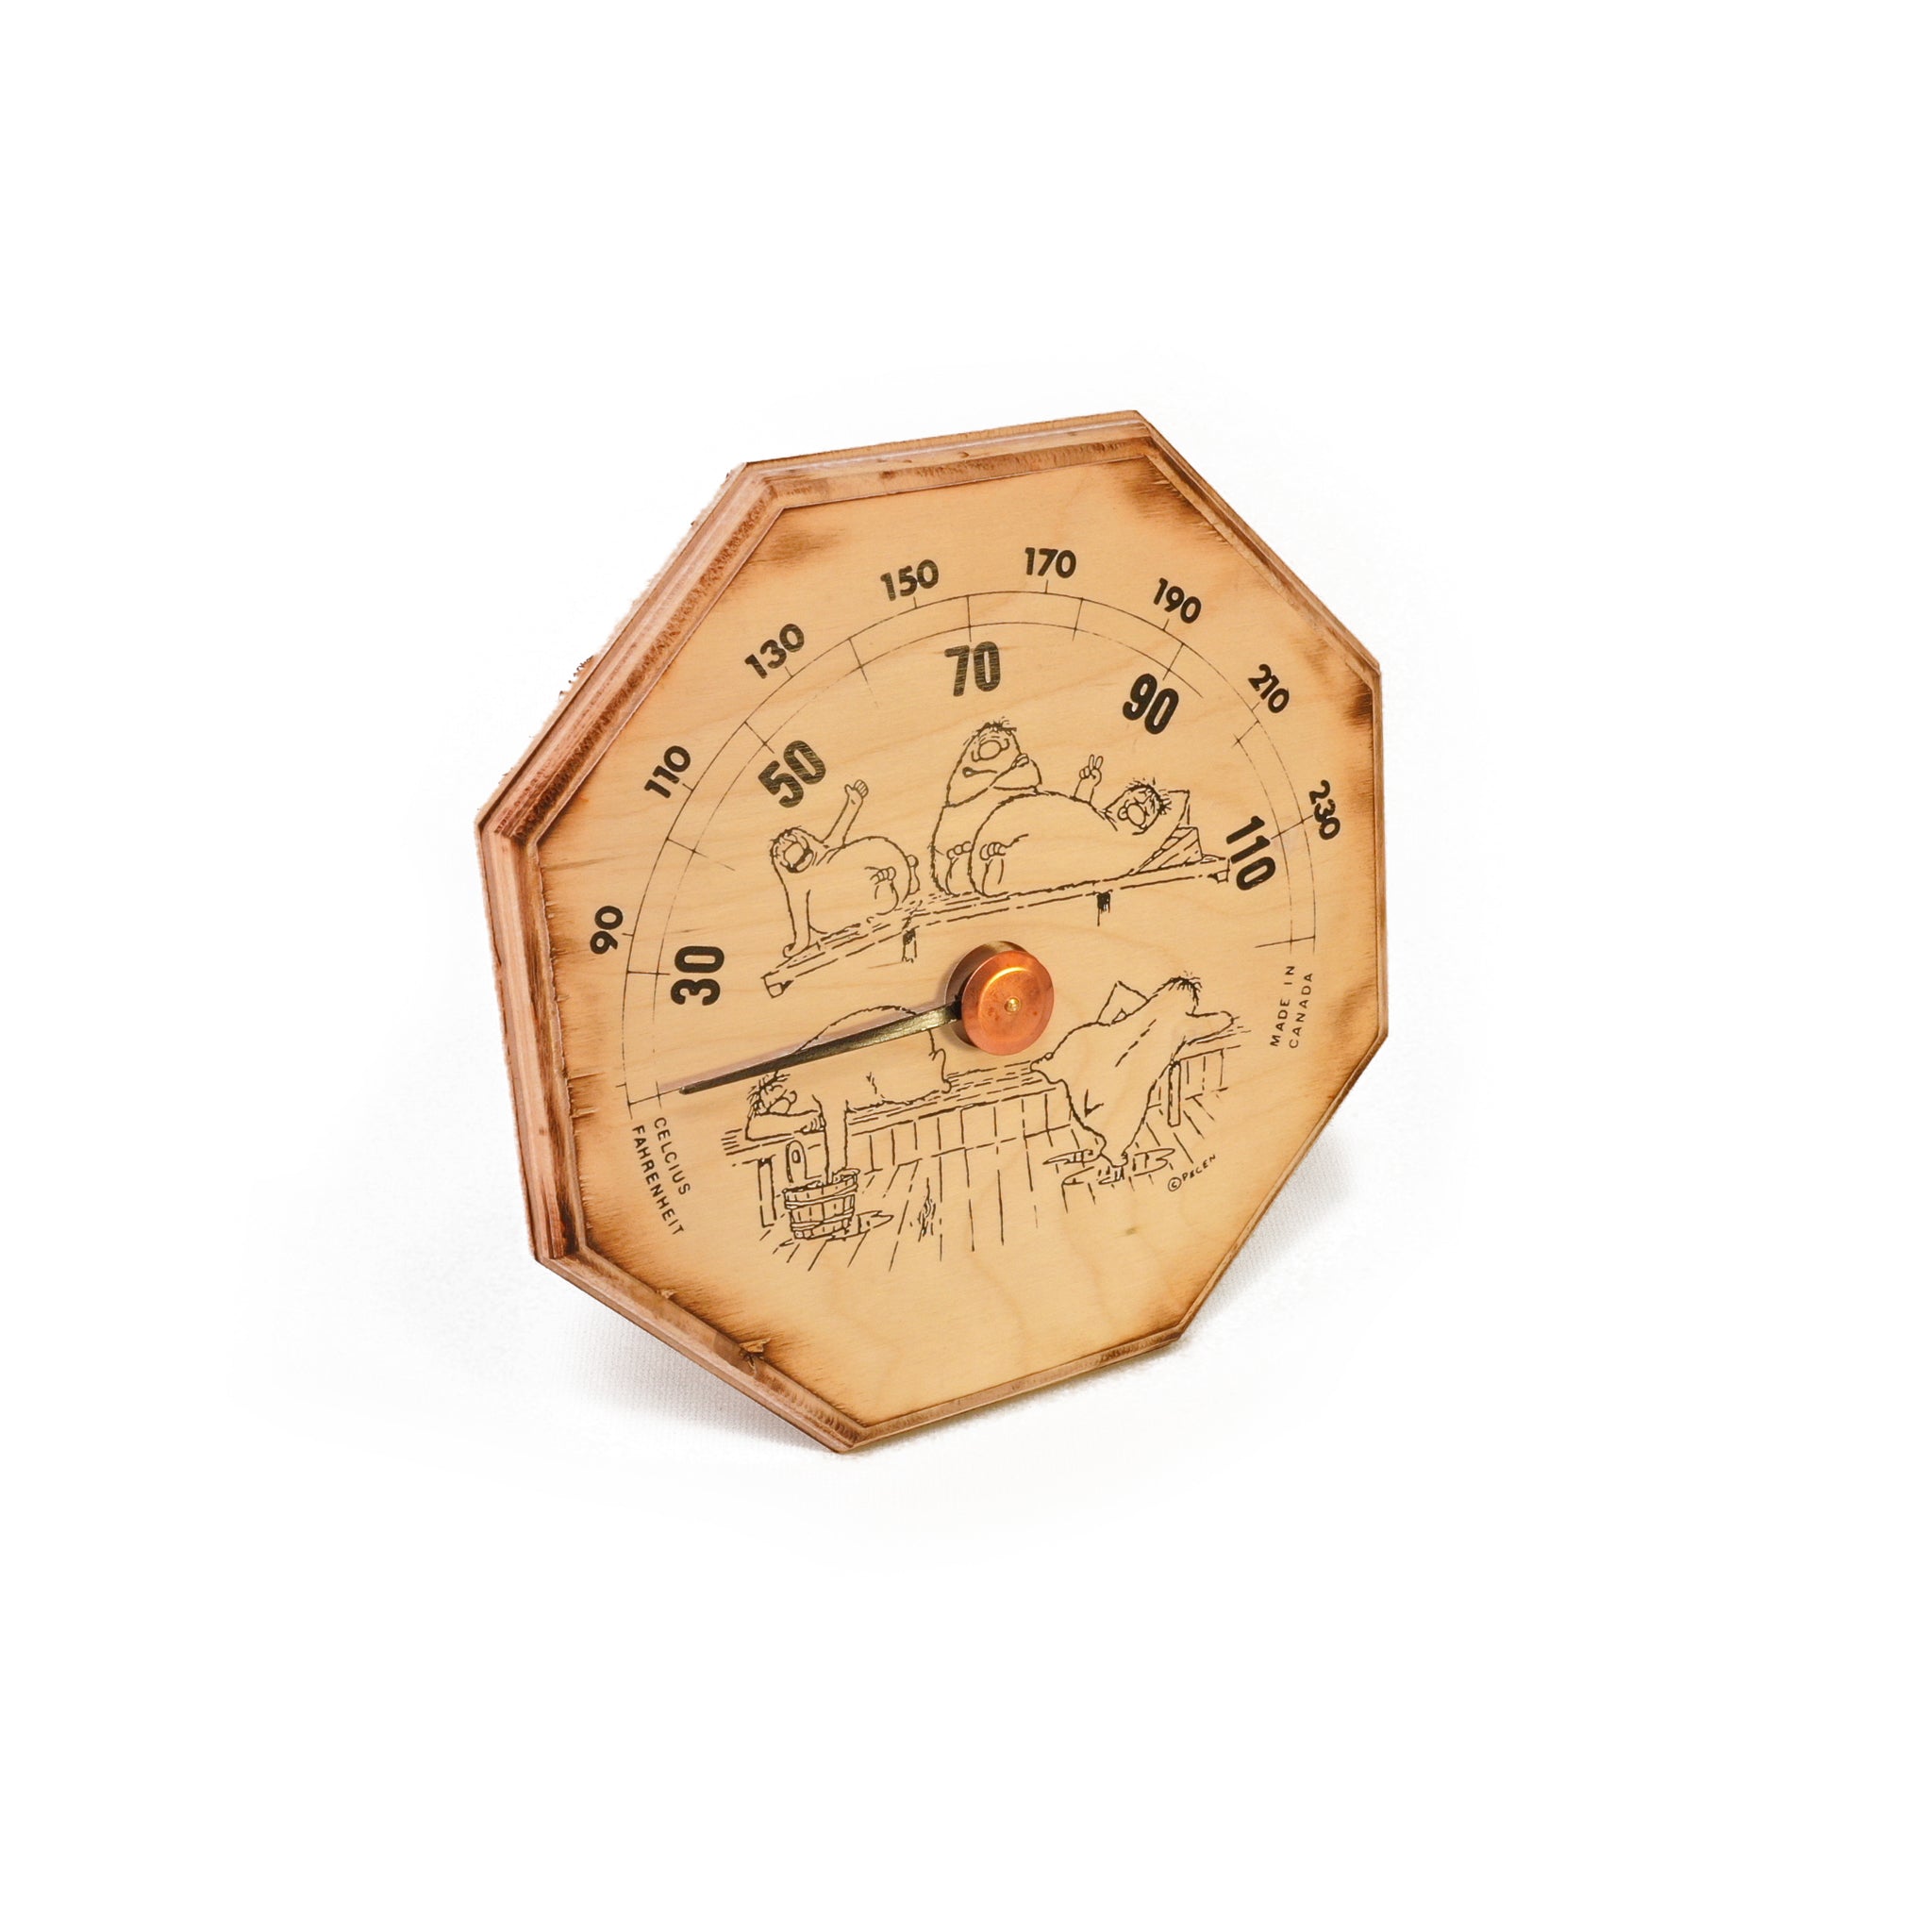 Octagon shaped cedar sauna thermometer with traditional Finnish art on white background.